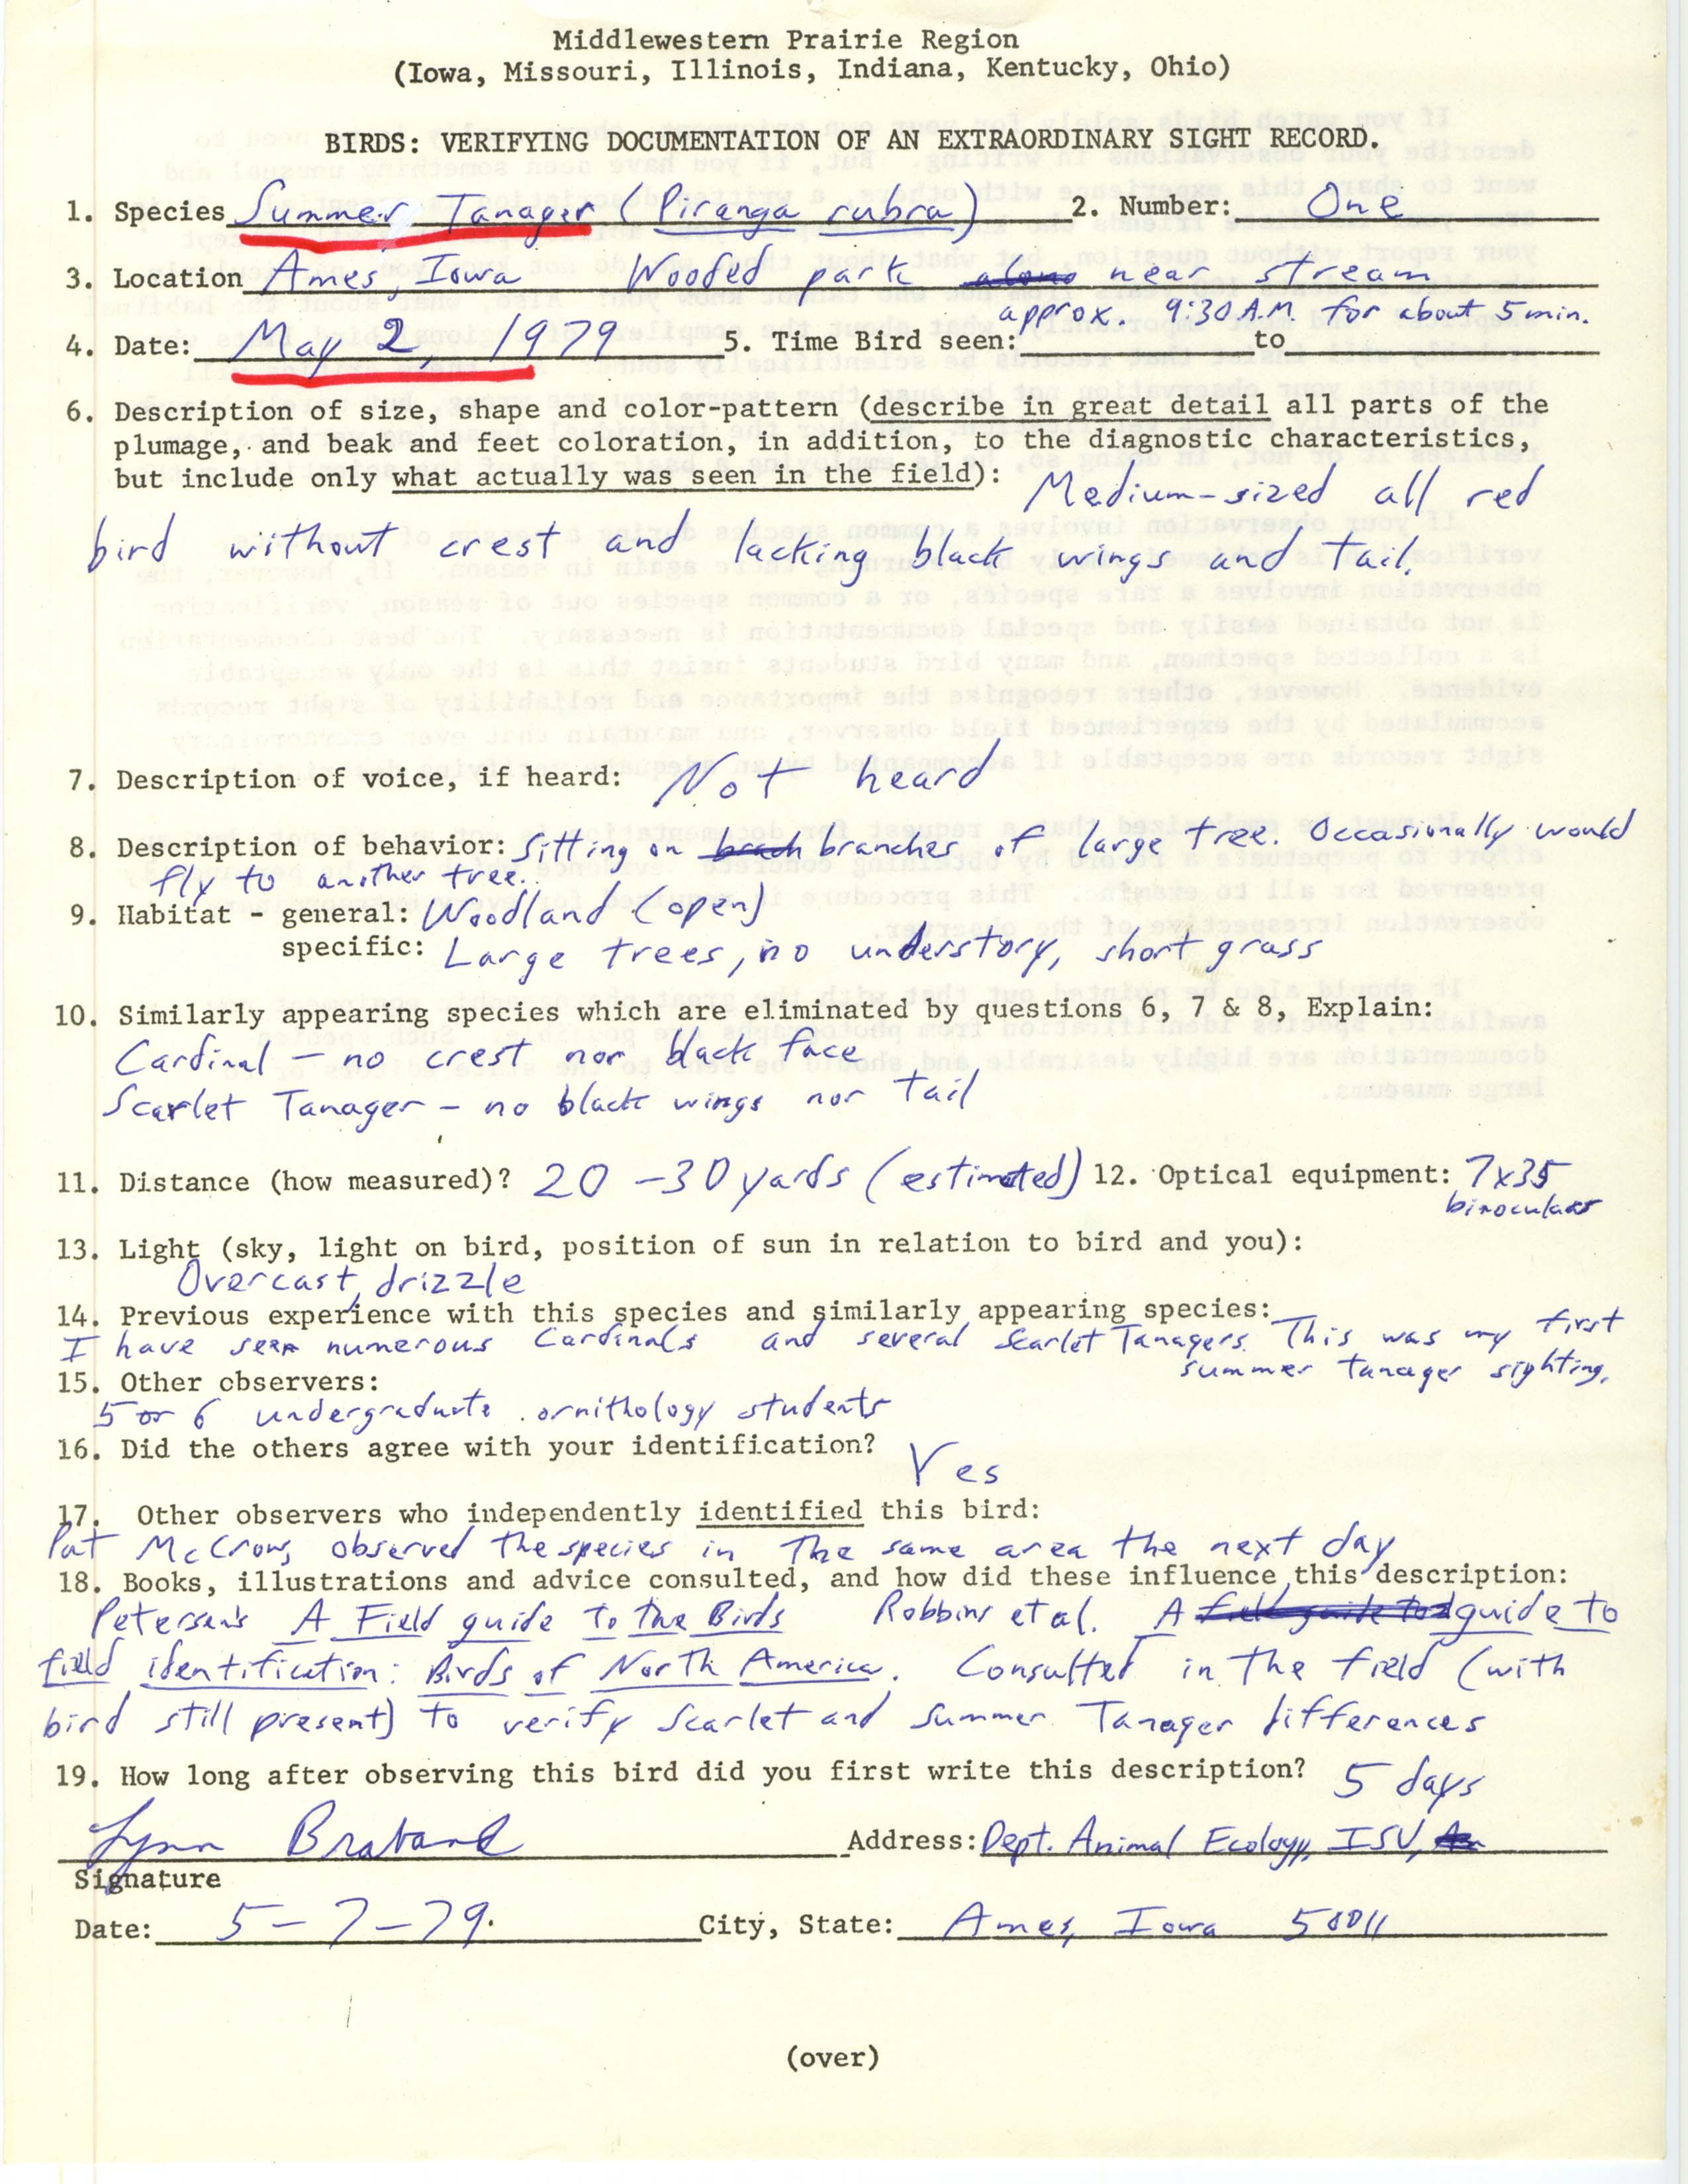 Rare bird documentation form for Summer Tanager at Ames, 1979